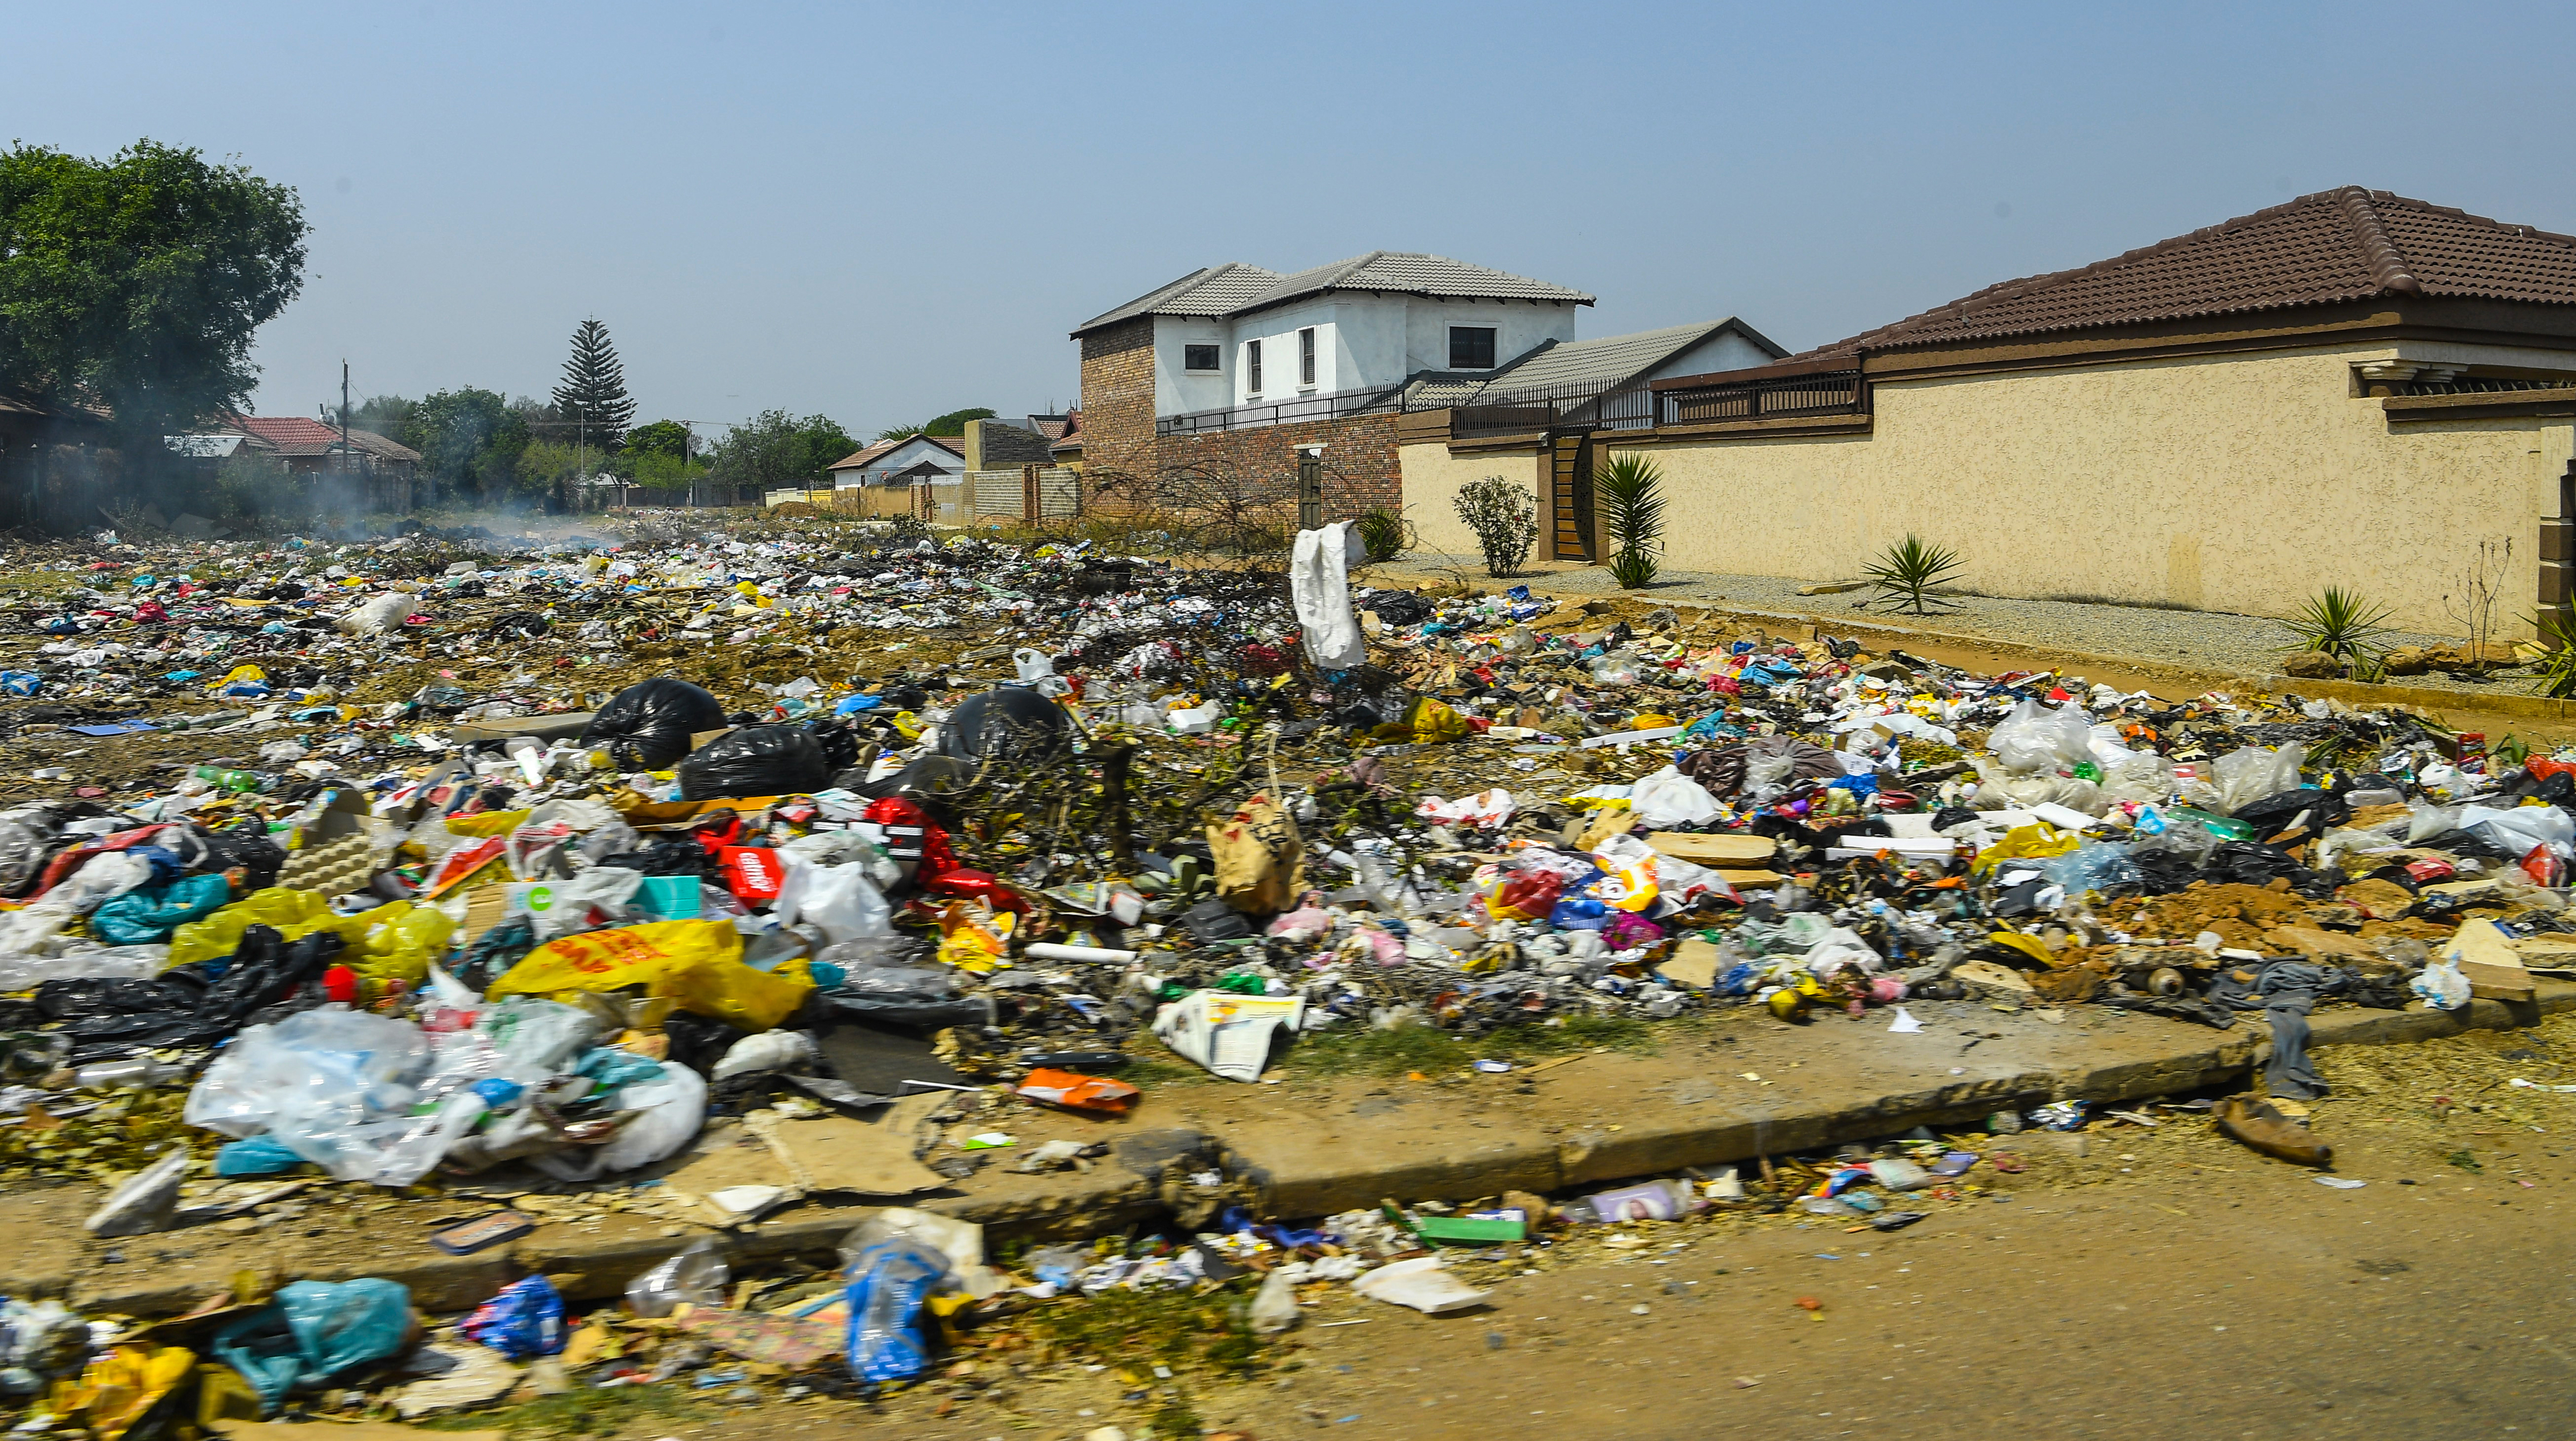 Uncollected waste piles in Tshwane